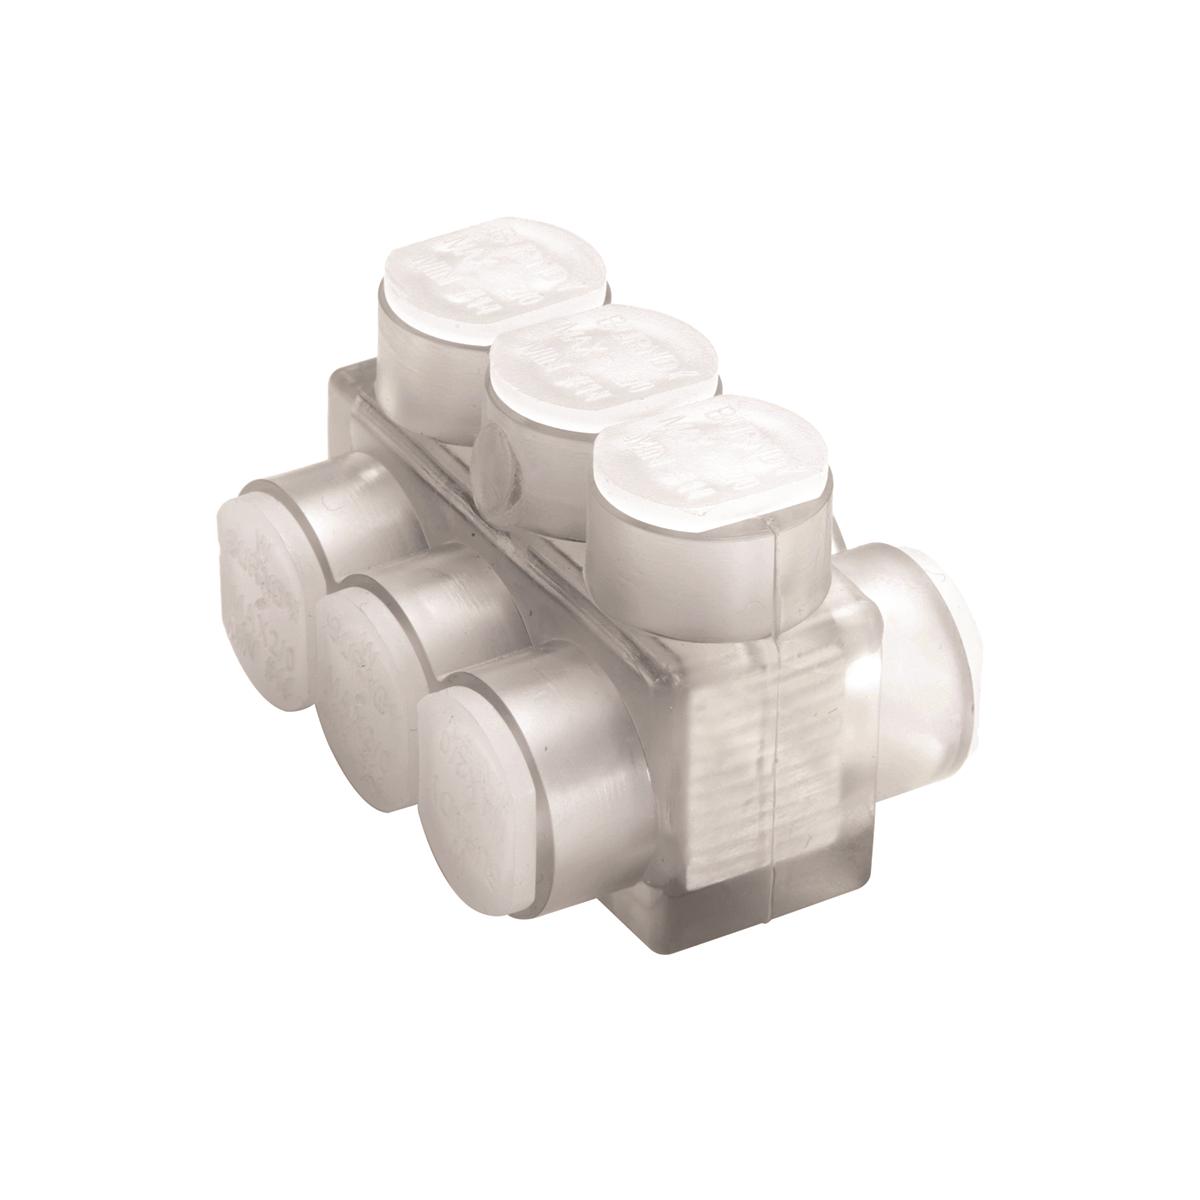 Hubbell BIBD60014 Plastisol covered multiple tap Connector with Double-Sided Entry. WIRE RANGE: #4 AWG - 600 kcmil  AL/CU  ; Clear Plastisol covered AL6061-T6 ,Aluminum body, Saves time, lowers installation costs, Eliminates taping. Allows visual confirmation that conducto